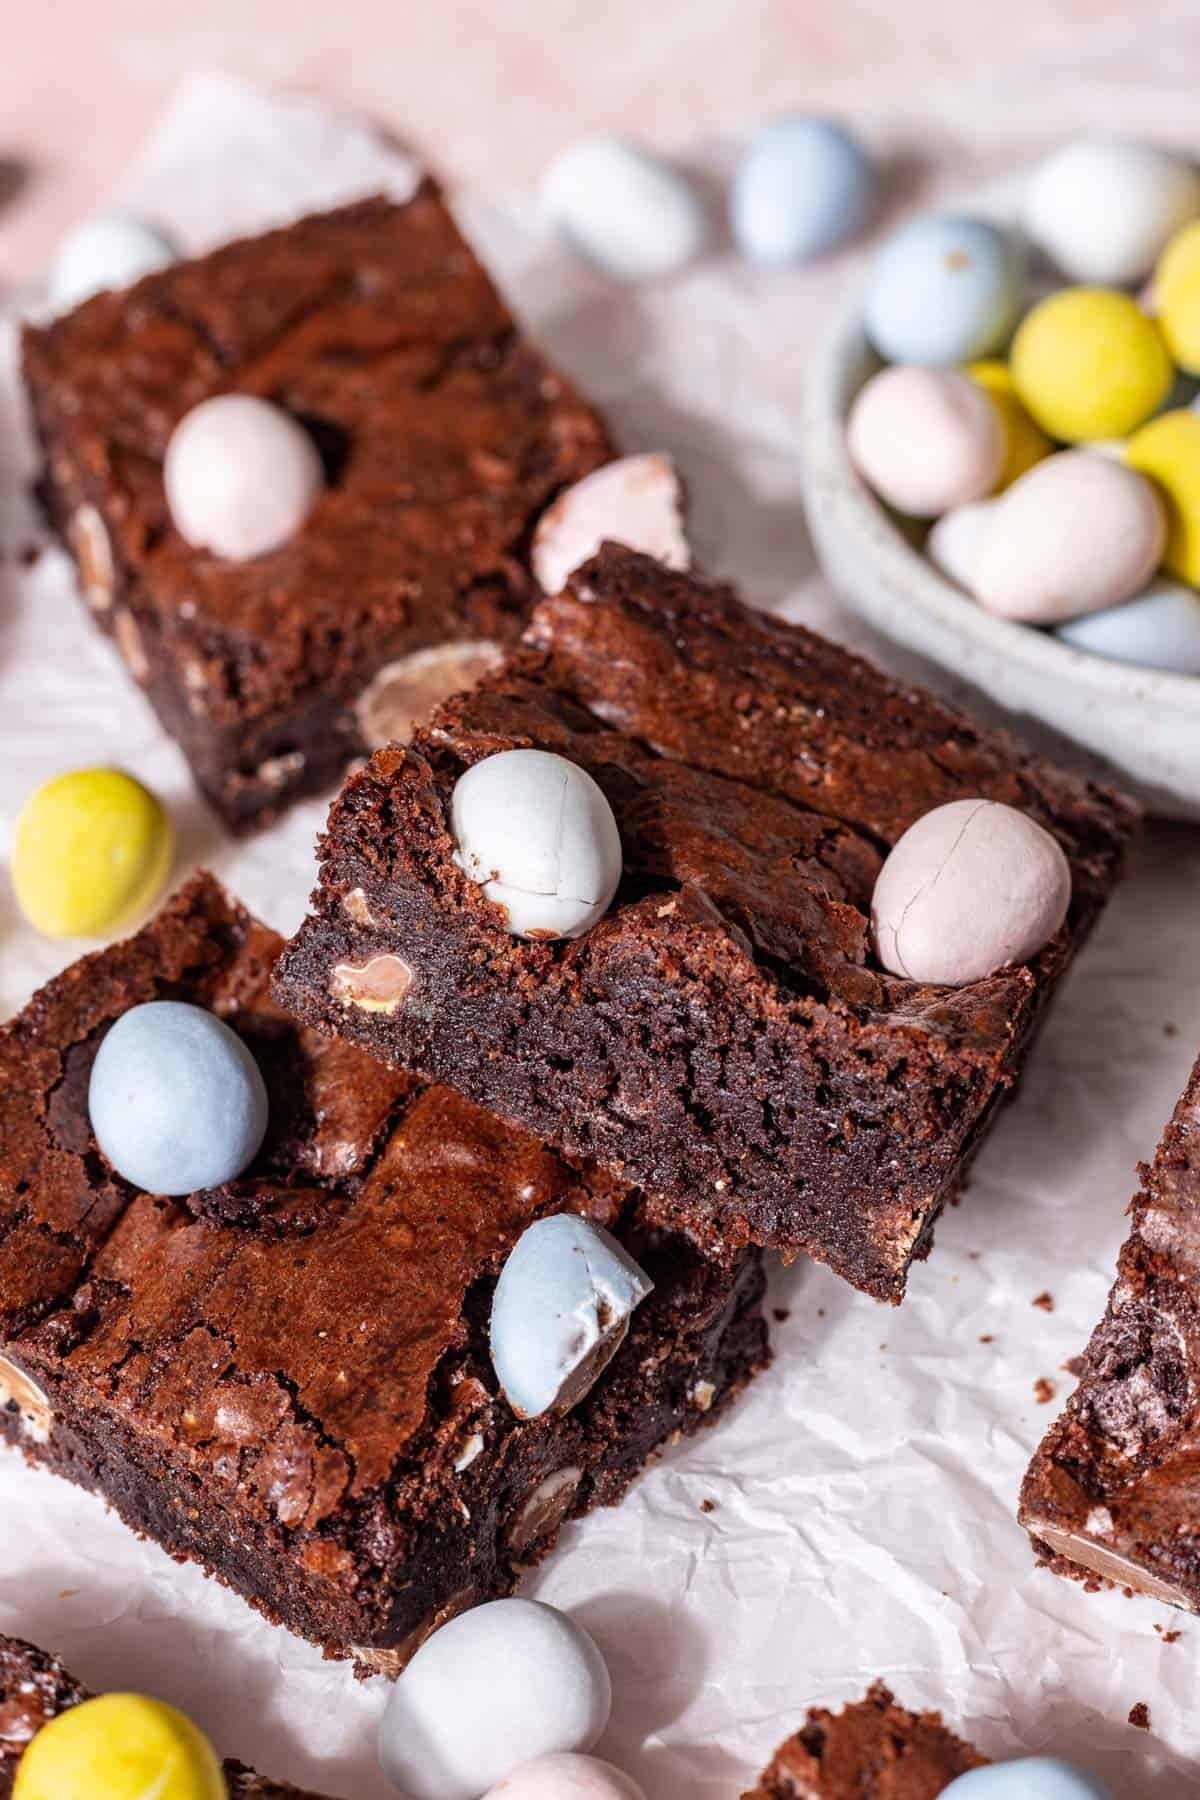 Mini easter egg brownies stacked on top of each other to show the fudgy center.